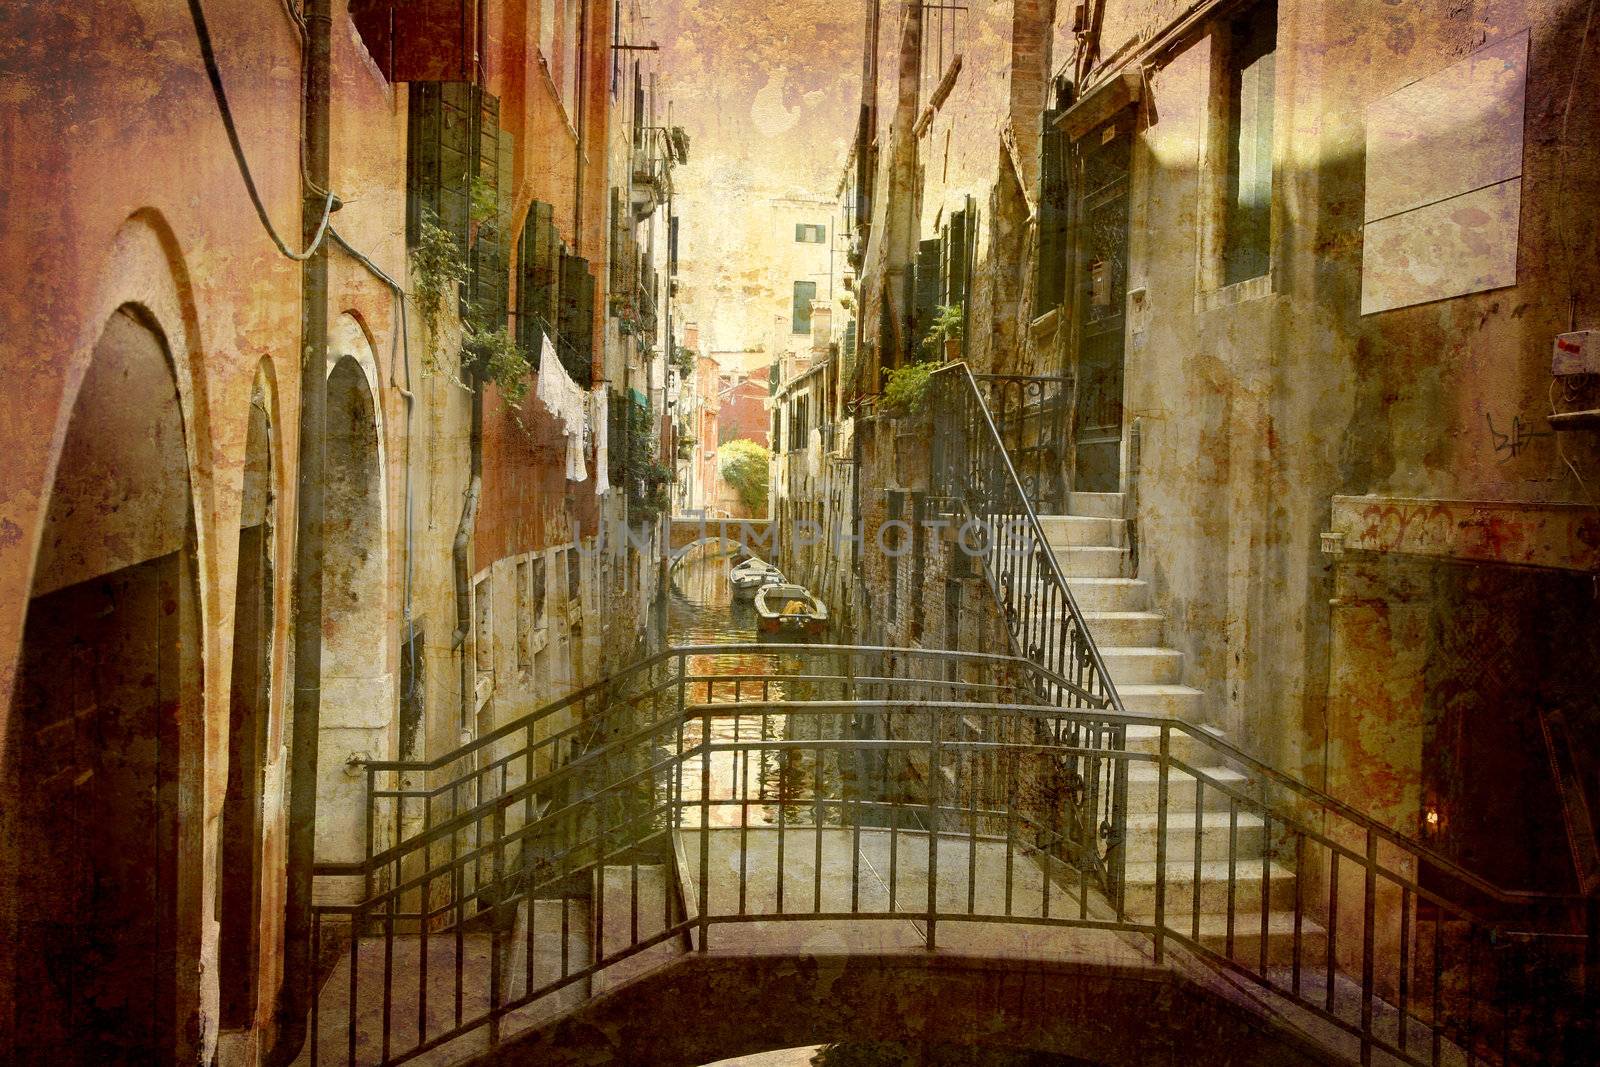 Artistic work of my own in retro style - Postcard from Italy. -  Urban Venice.